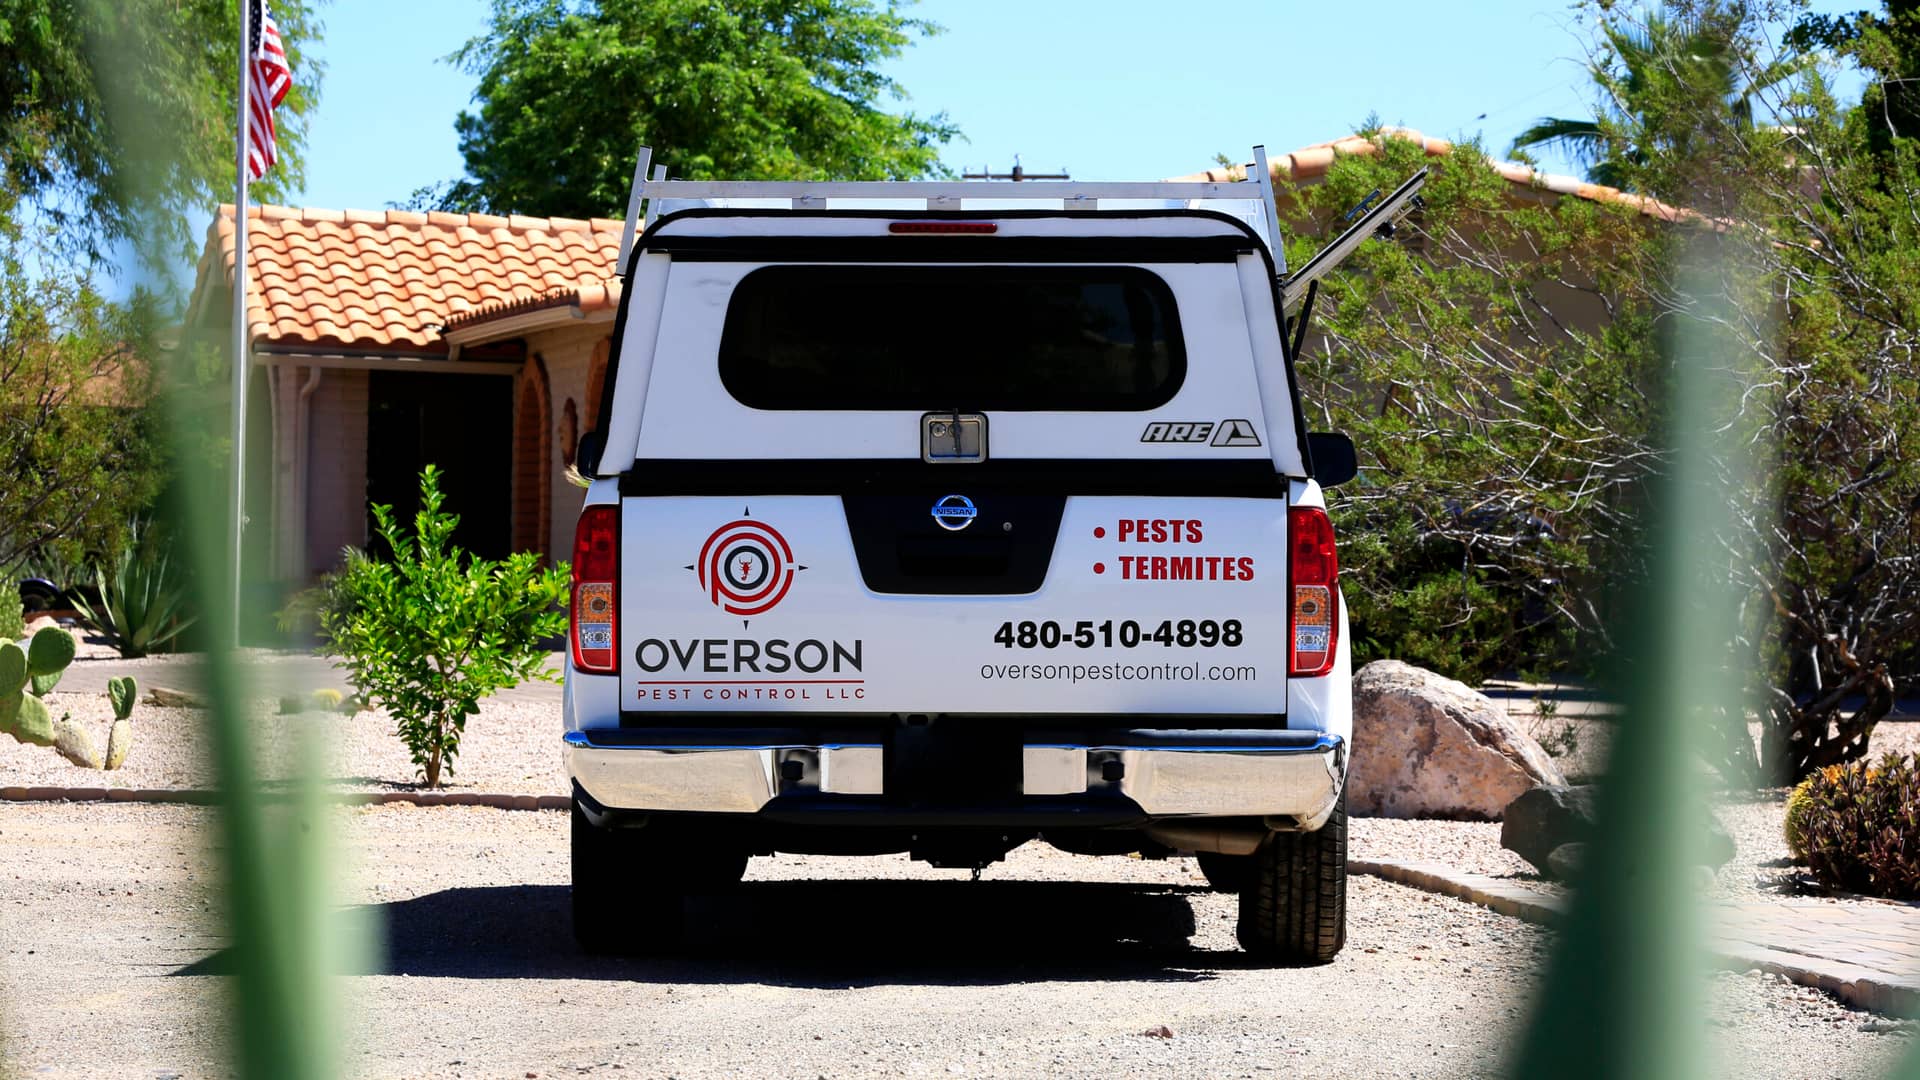 Overson-Pest-Control-Truck